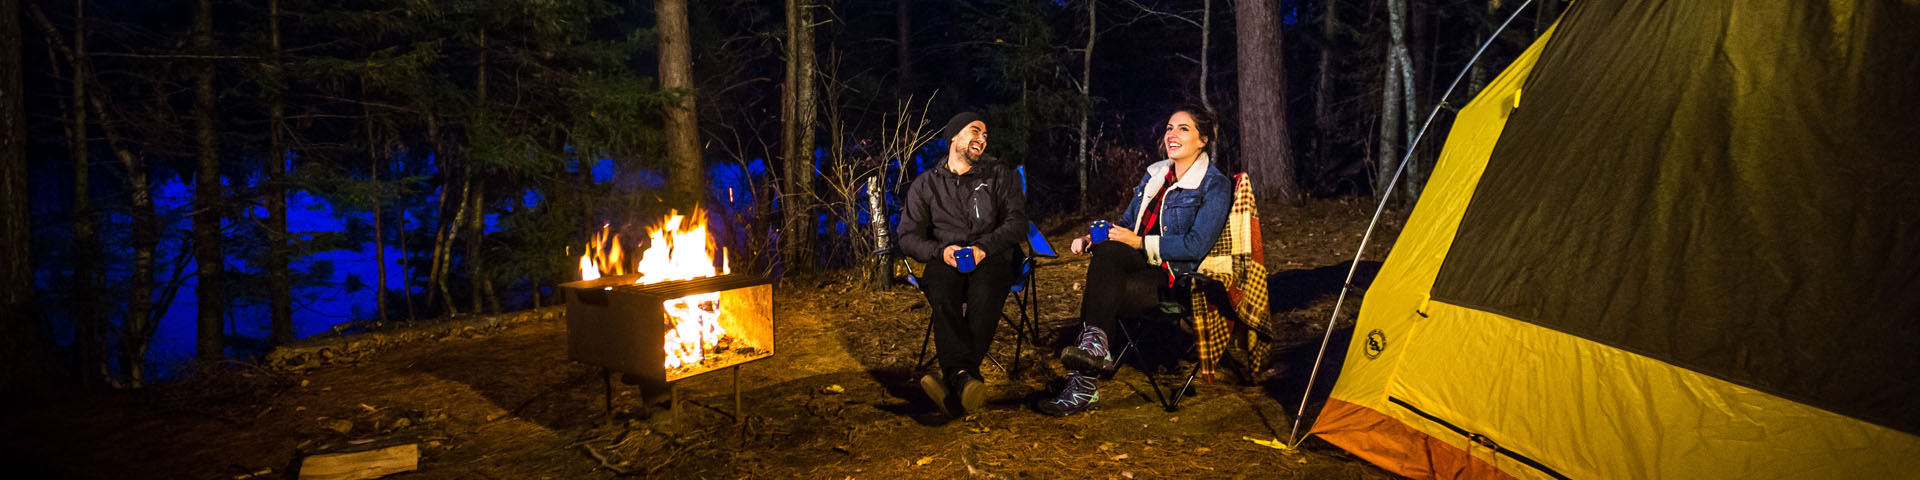 A couple sitting by the fire at their backcountry camping site.